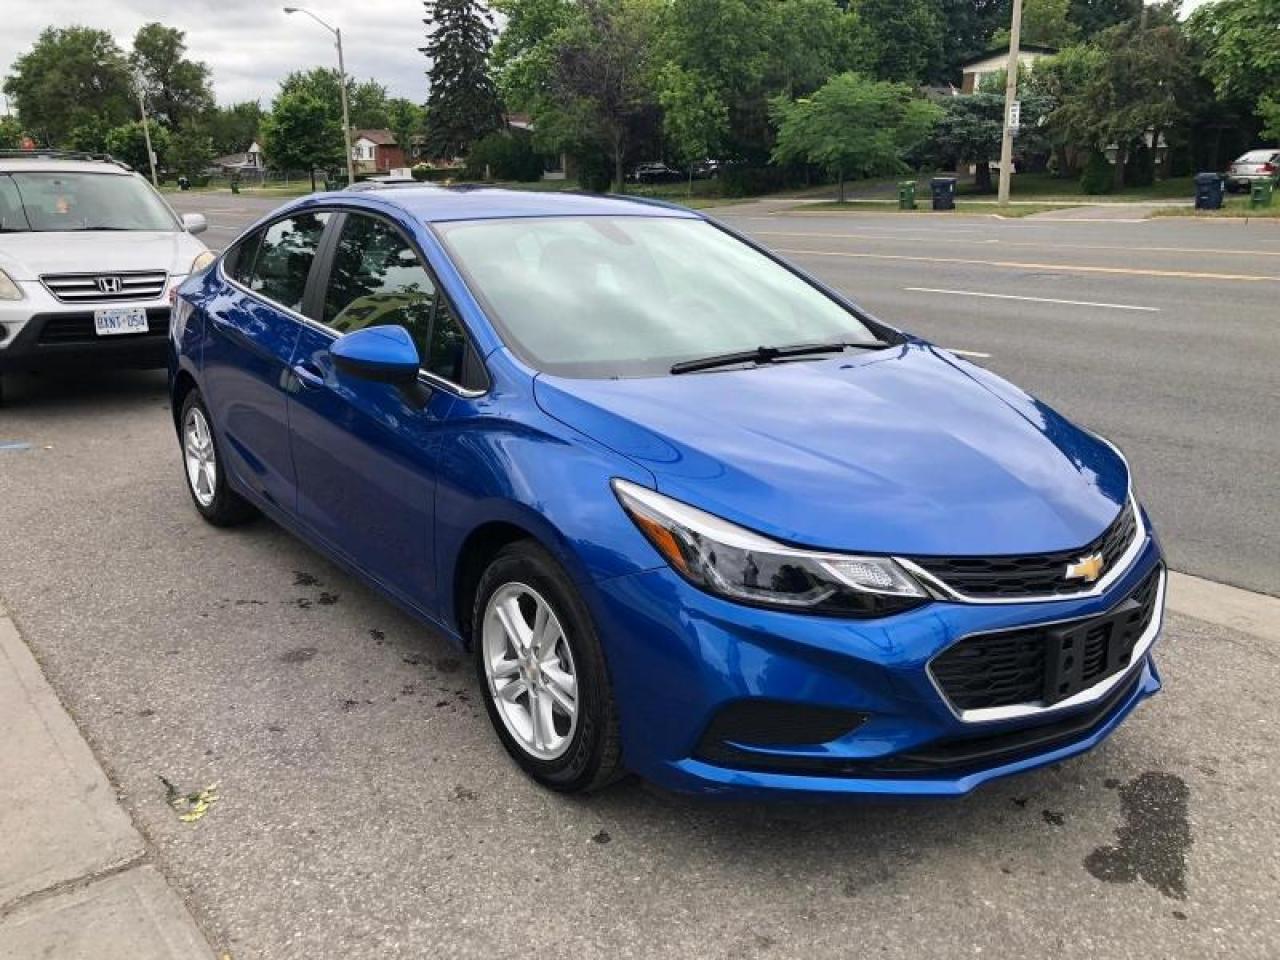 Used 2018 Chevrolet Cruze 4dr Sdn 1.4L LT w/1SD for Sale